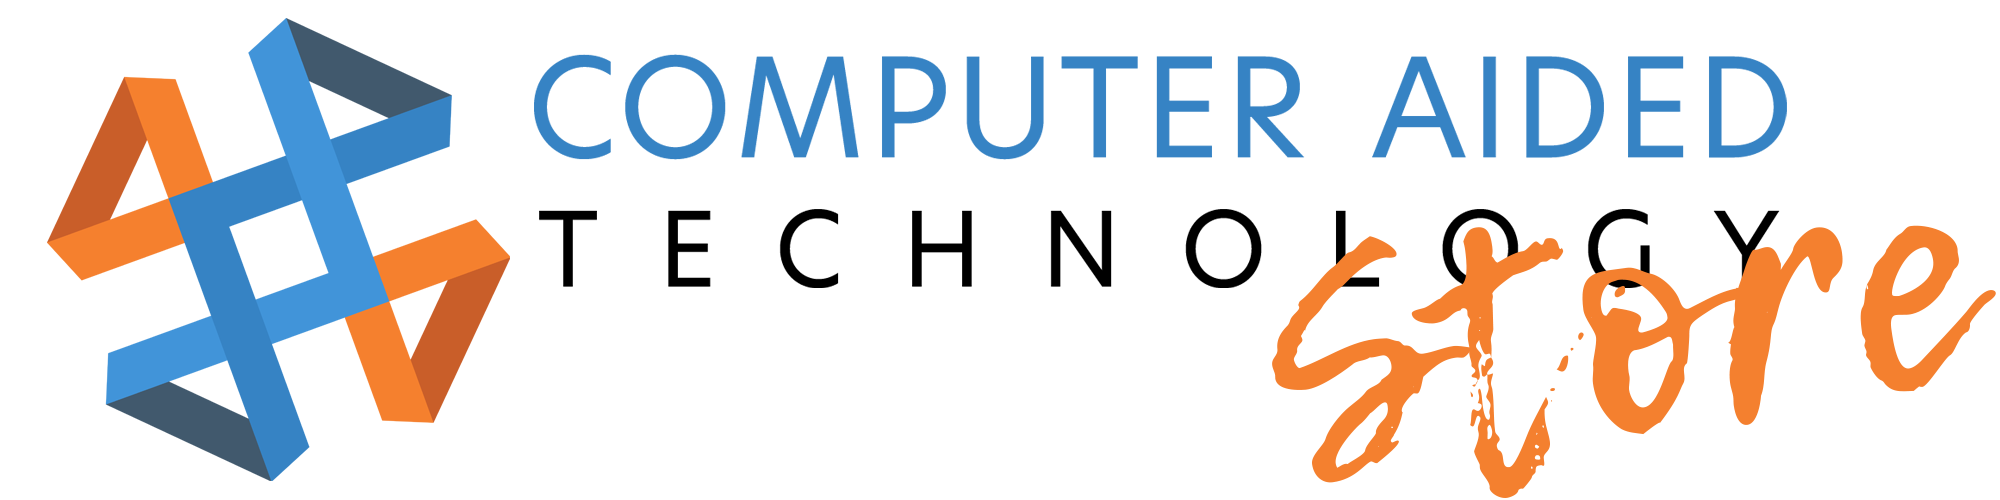 Computer Aided Technology Store